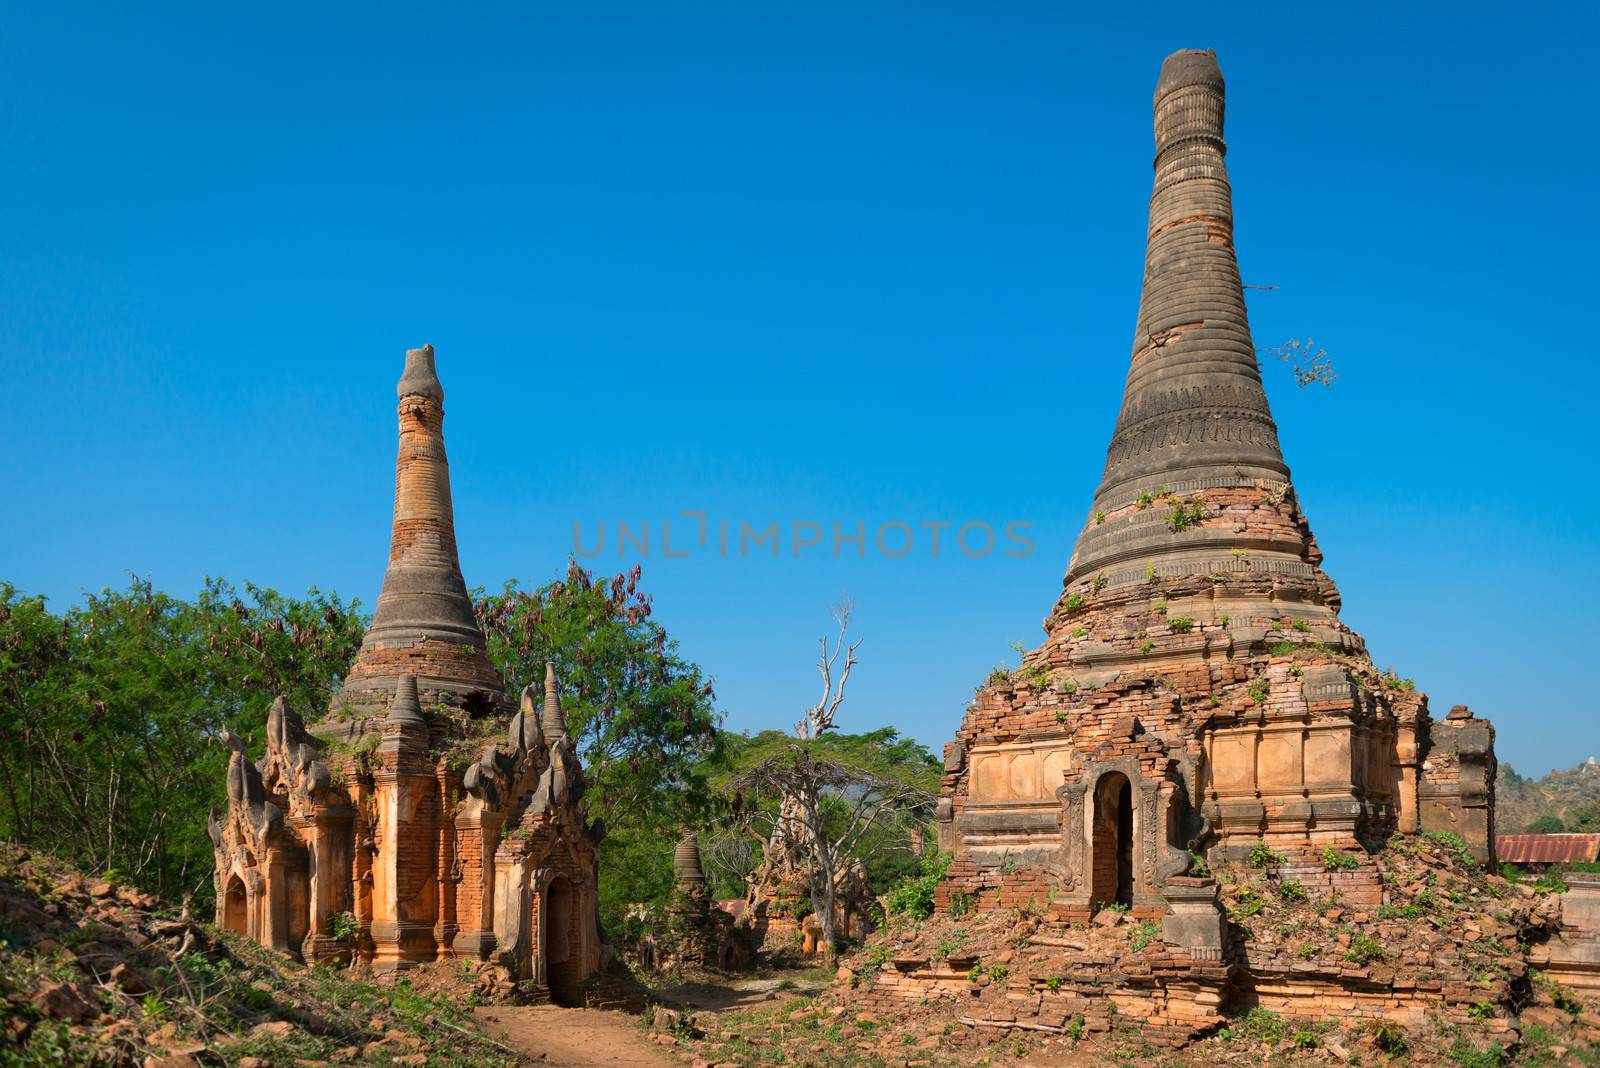 Ruins of ancient Burmese Buddhist pagodas Nyaung Ohak in the village of Indein on Inlay Lake in Shan State, Myanmar (Burma).